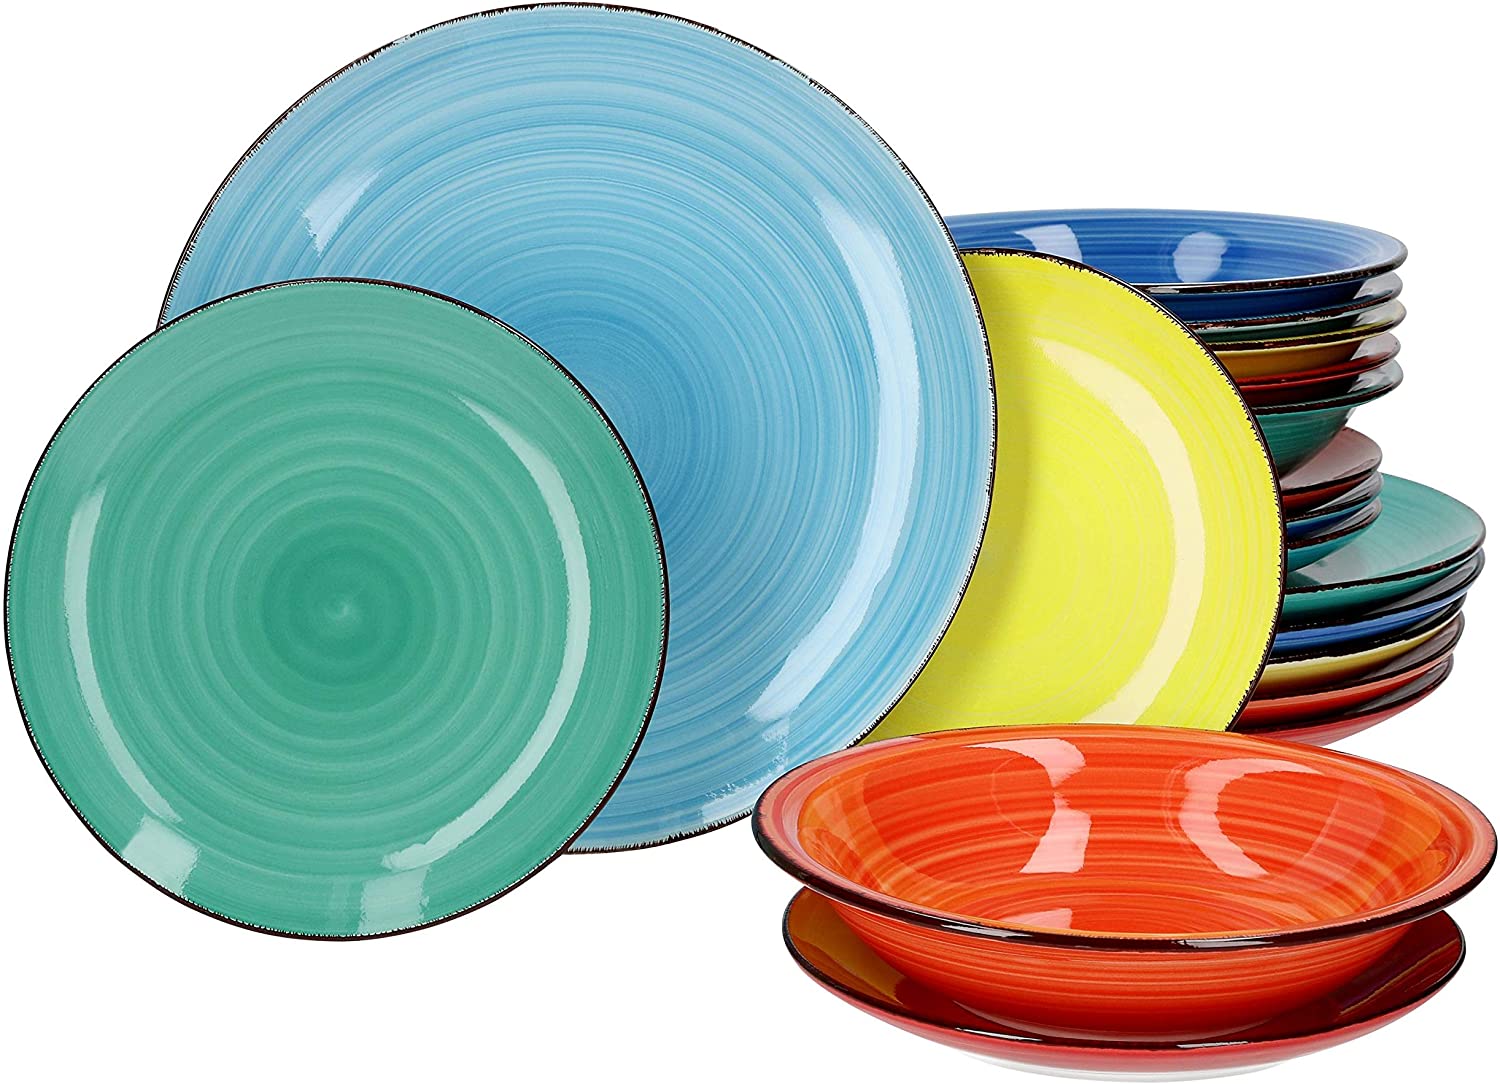 MamboCat Colour Power Plate Set Earthenware Service Set I Dinnerware 6 People Modern Hand-Painted Oven Safe 6 Dinner Plates 6 Colourful Soup Plates 6 Cake Plates Vintage Table Set 18 Pieces